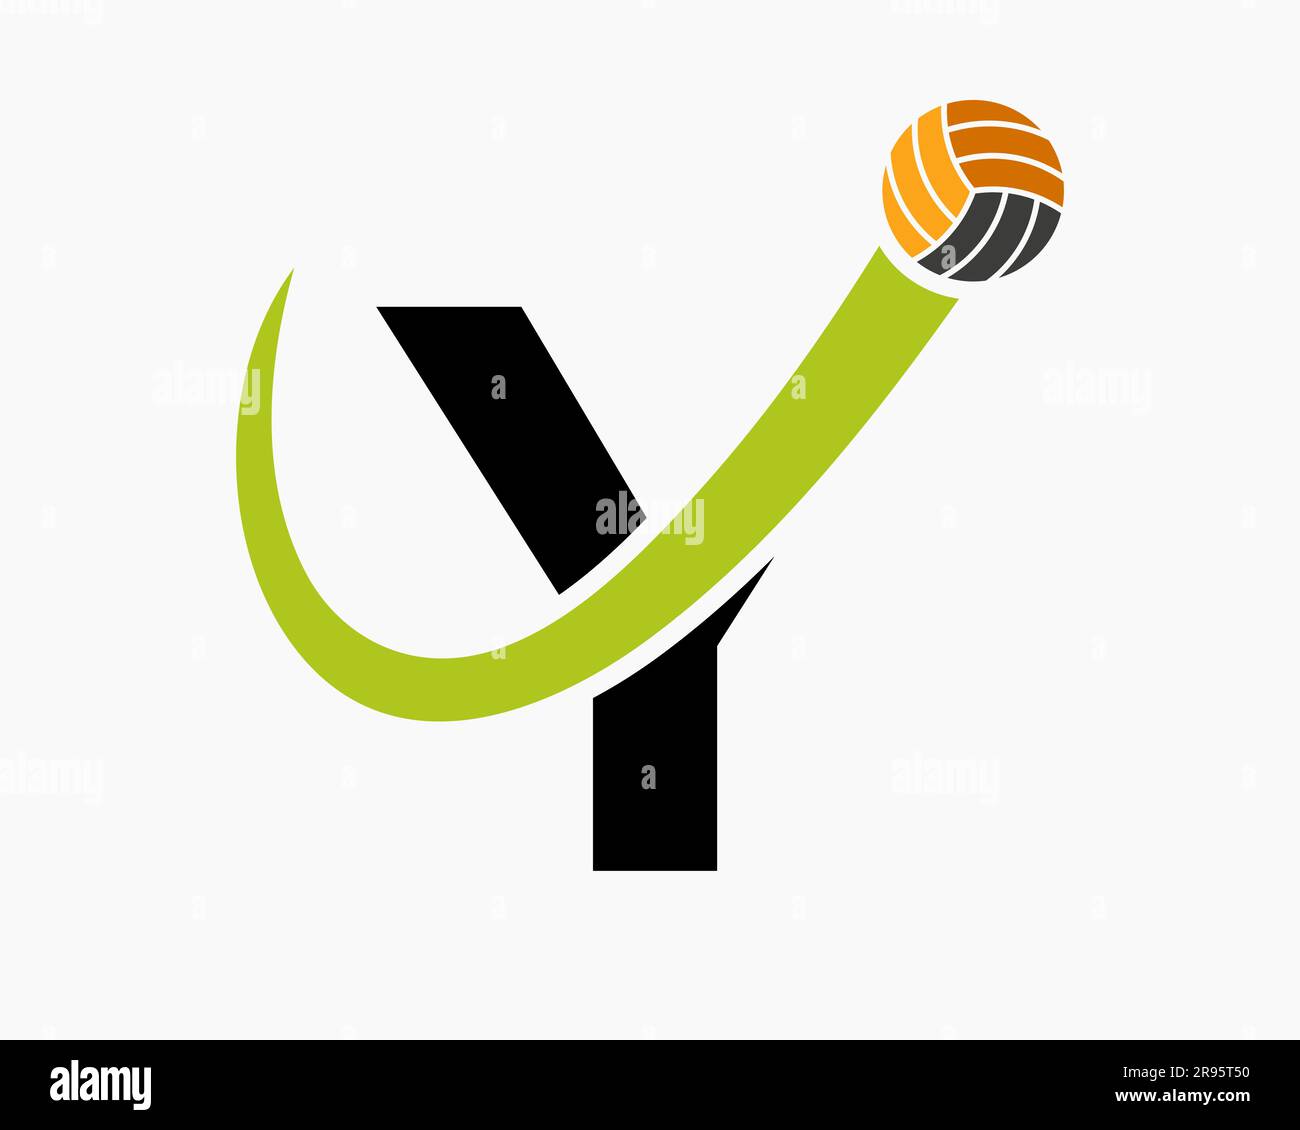 Letter Y Volleyball Logo Concept With Moving Volley Ball Icon. Volleyball Sports Logotype Template Stock Vector